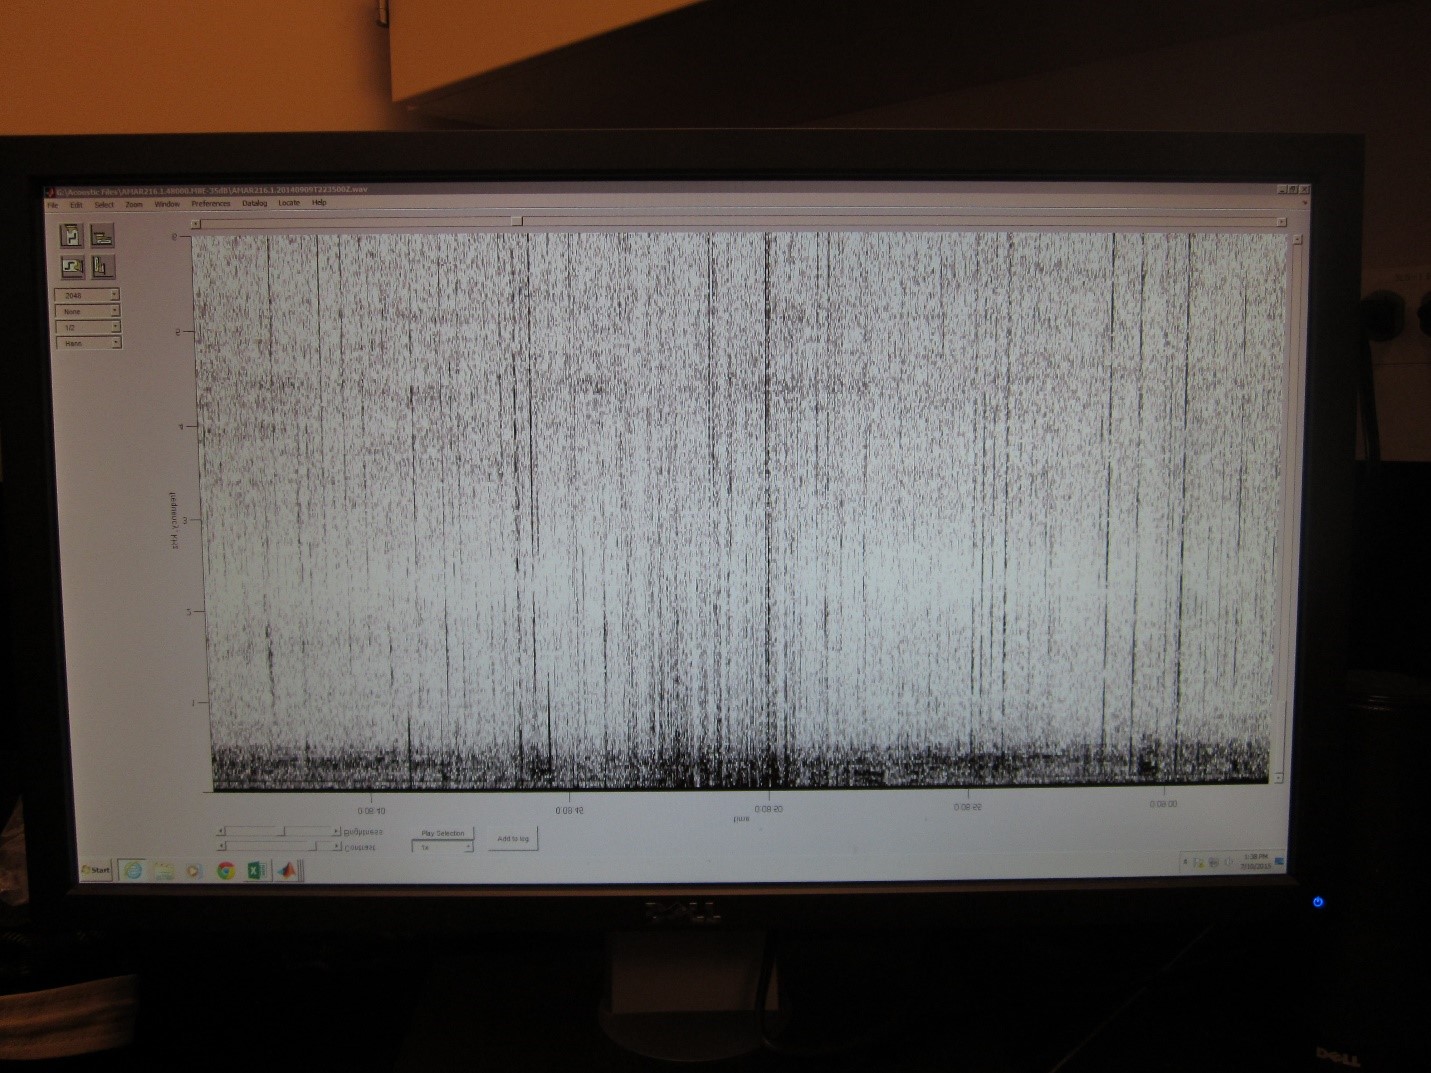 A computer monitor showing a spectogram of a seal roar displayed in scientific software.